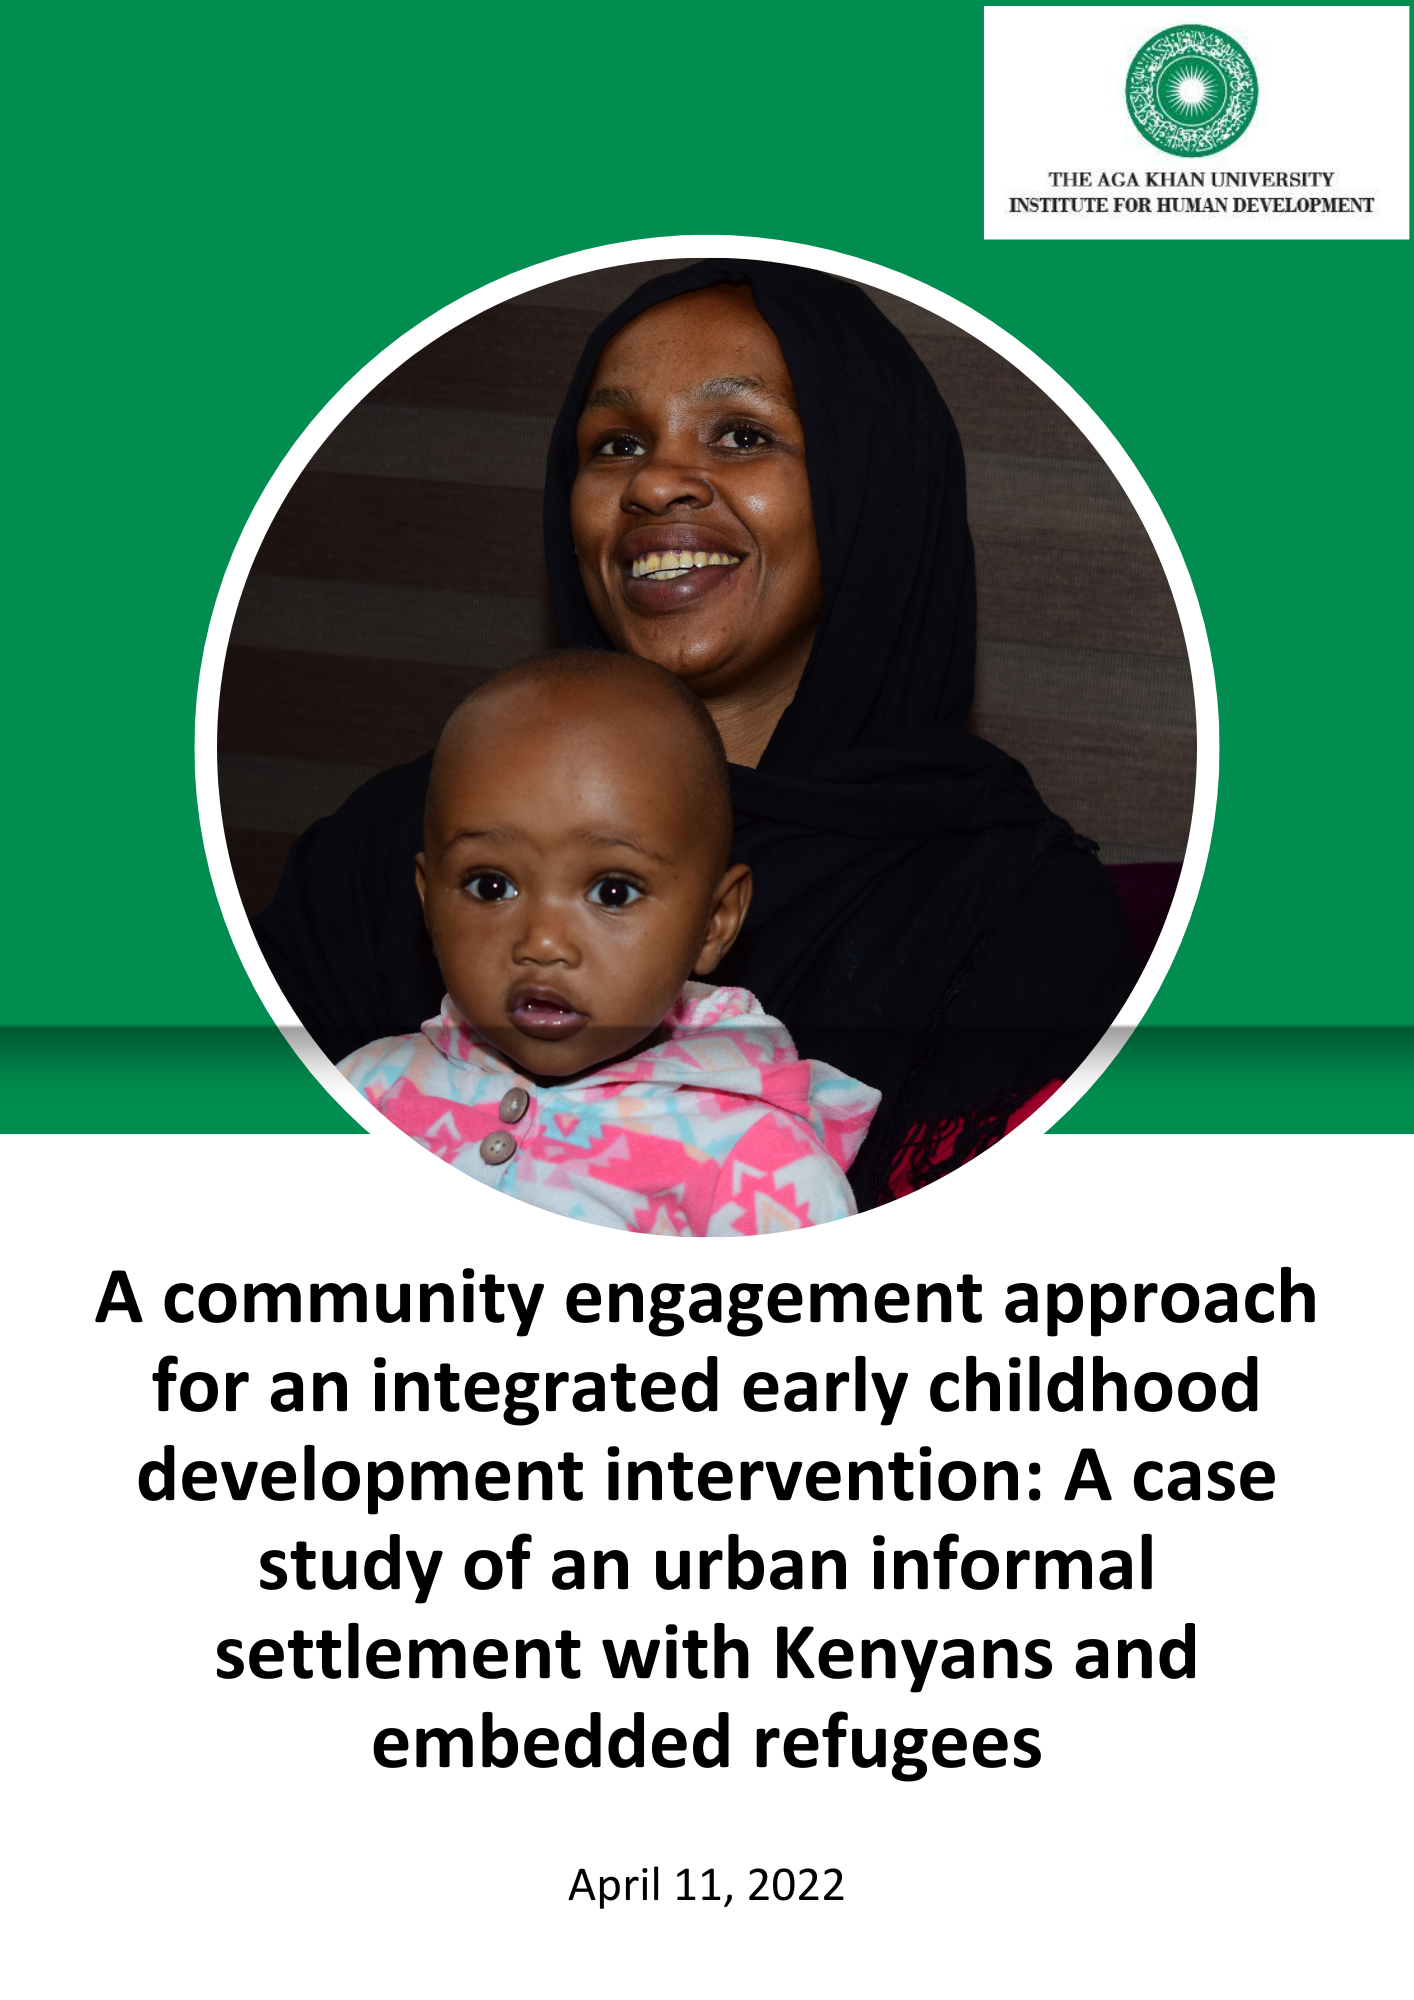 A community engagement approach for an integrated early childhood development intervention: a case study of an urban informal settlement with Kenyans and embedded refugees